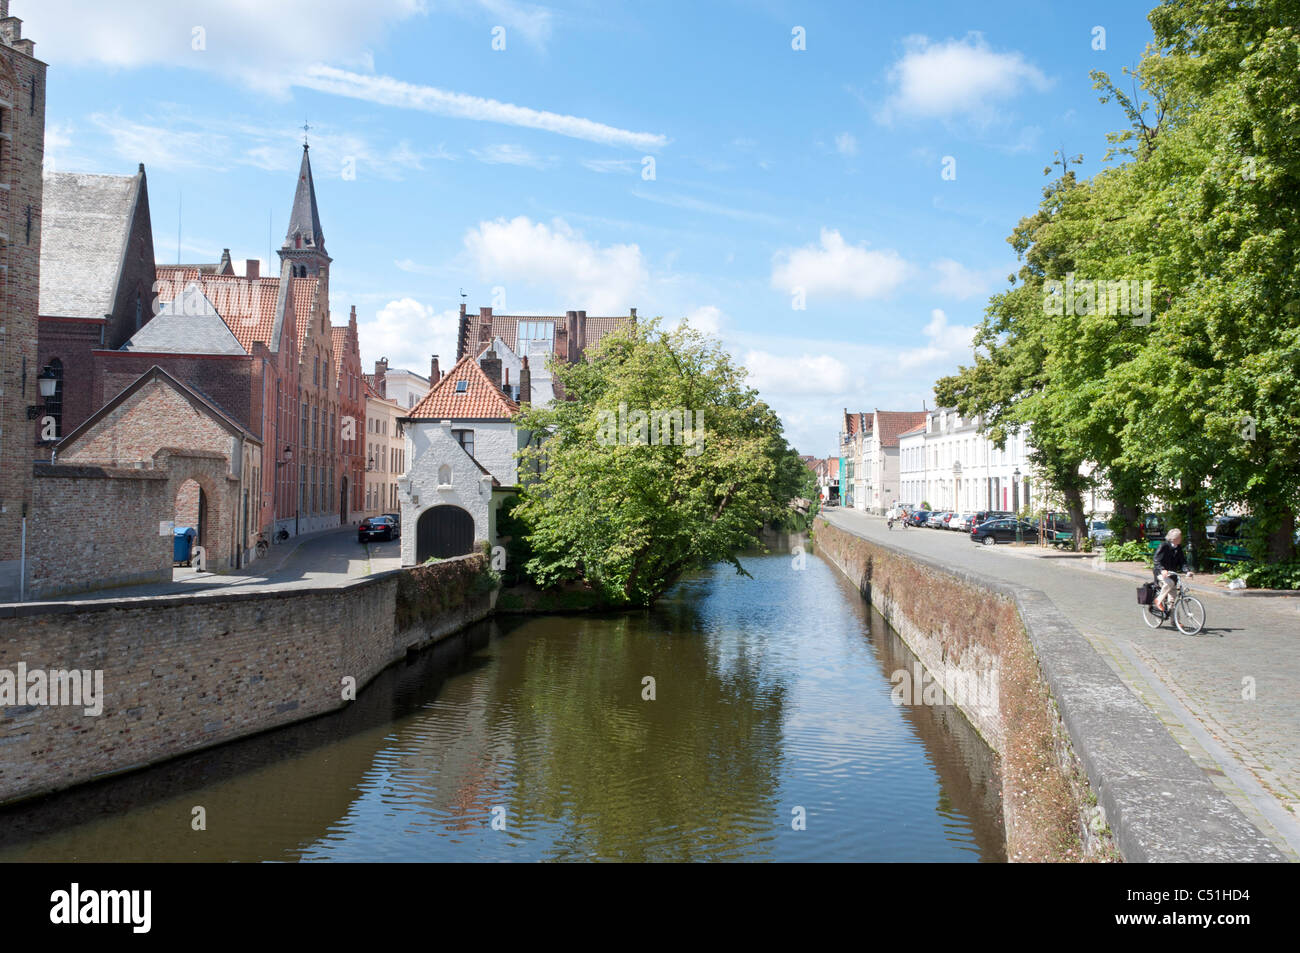 A picturesque scene featuring a Bruges canal. Stock Photo